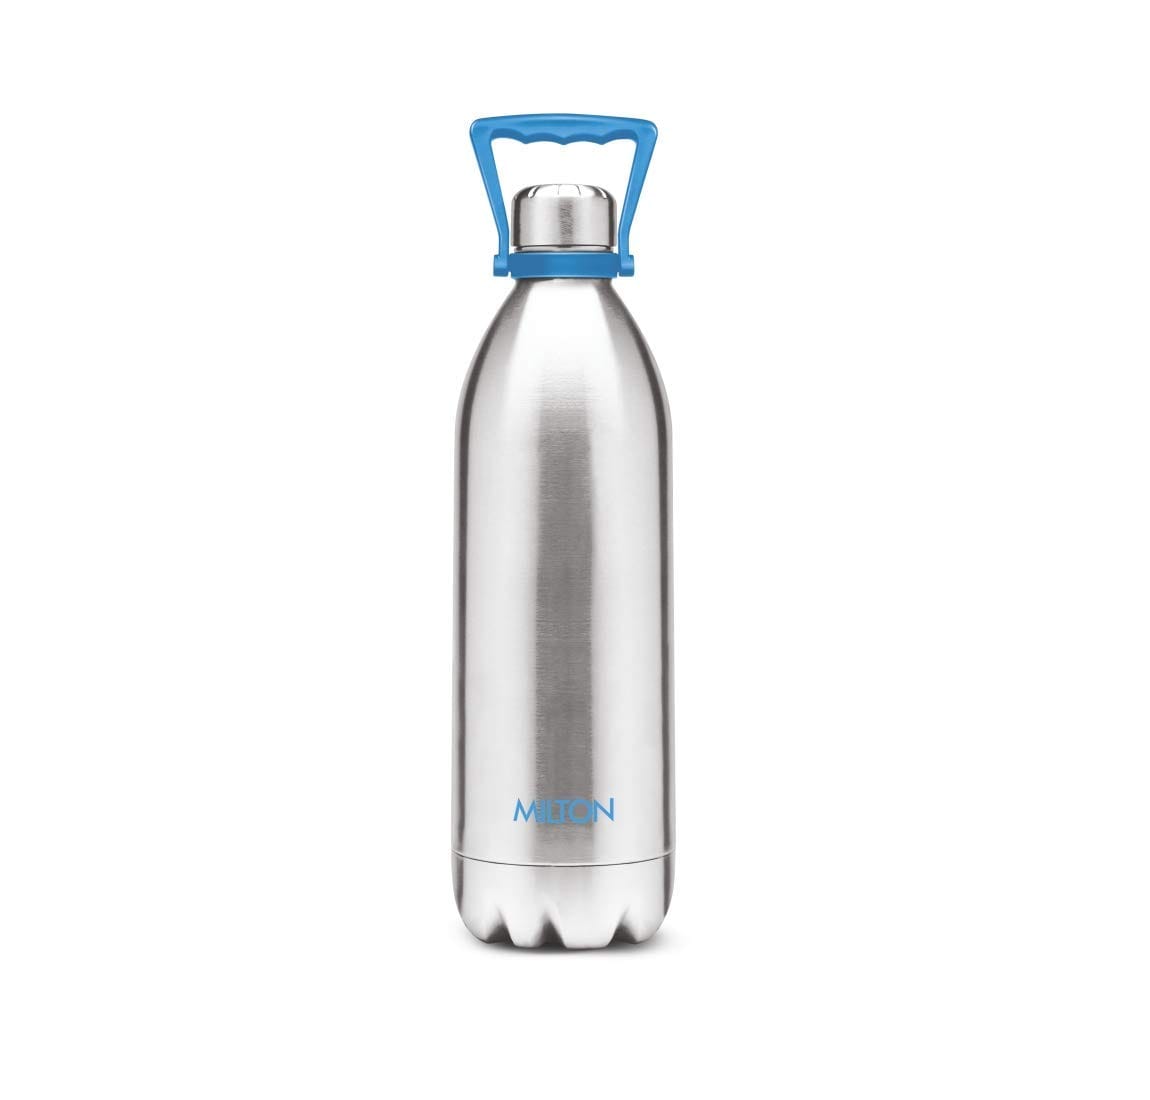 Milton Thermosteel Hot & Cold Water Bottle And Flask Review